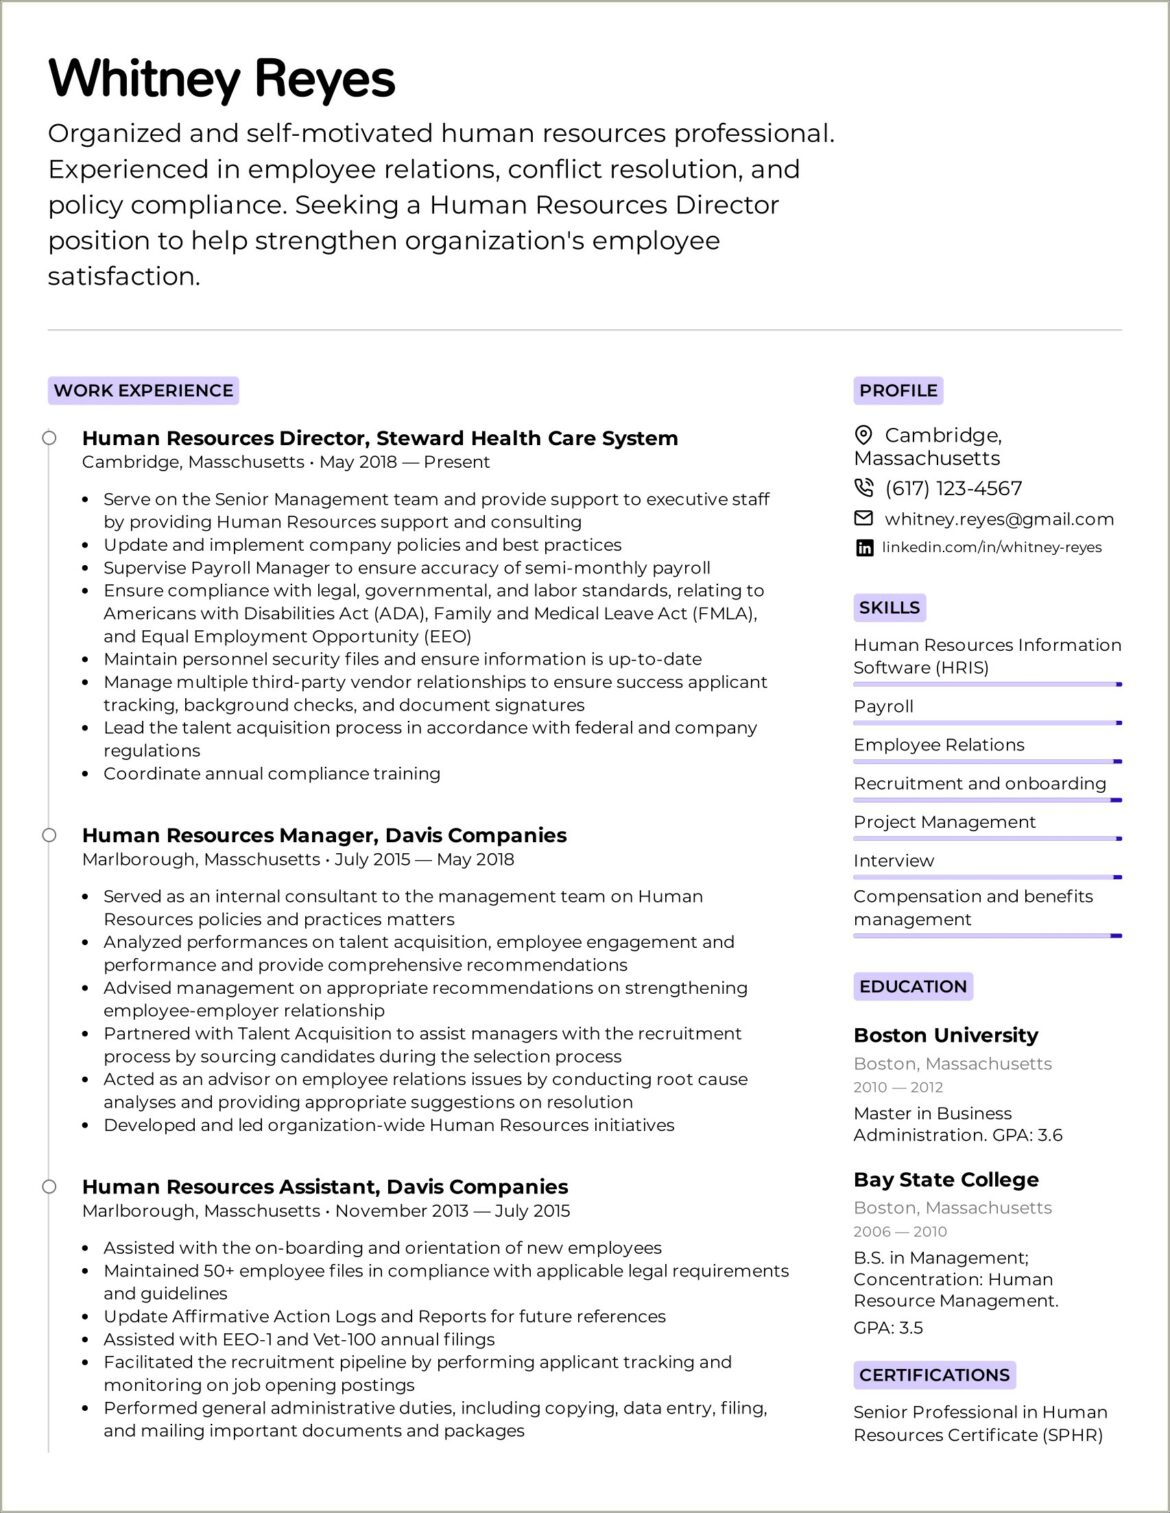 Sample Resume With Different Work Experience